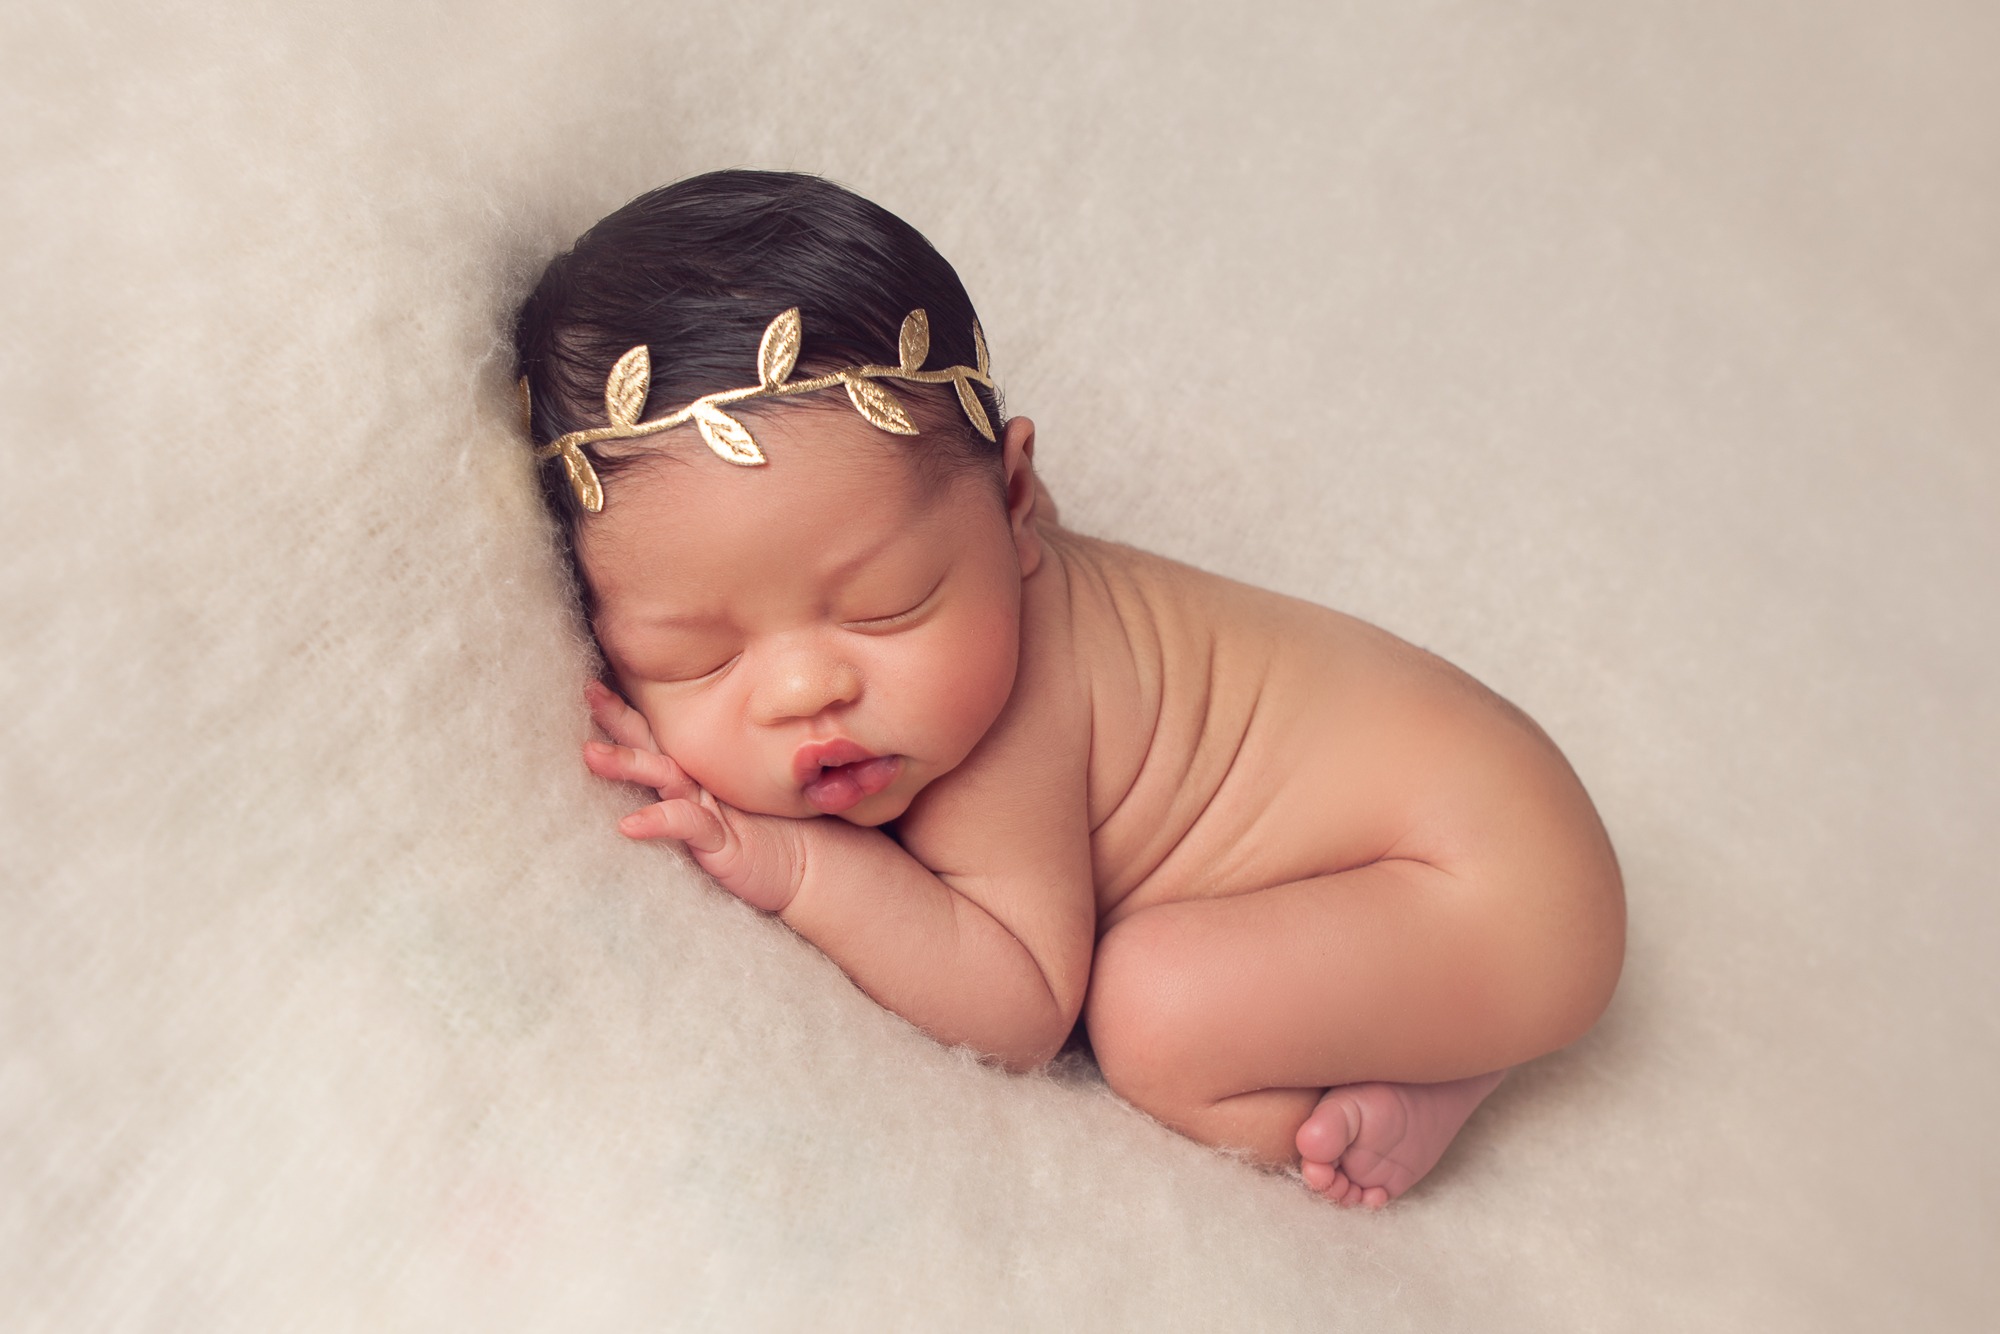 40 Adorable Newborn Photography Ideas For Your Junior - Bored Art | Newborn  photoshoot, Adorable newborn, Baby photography